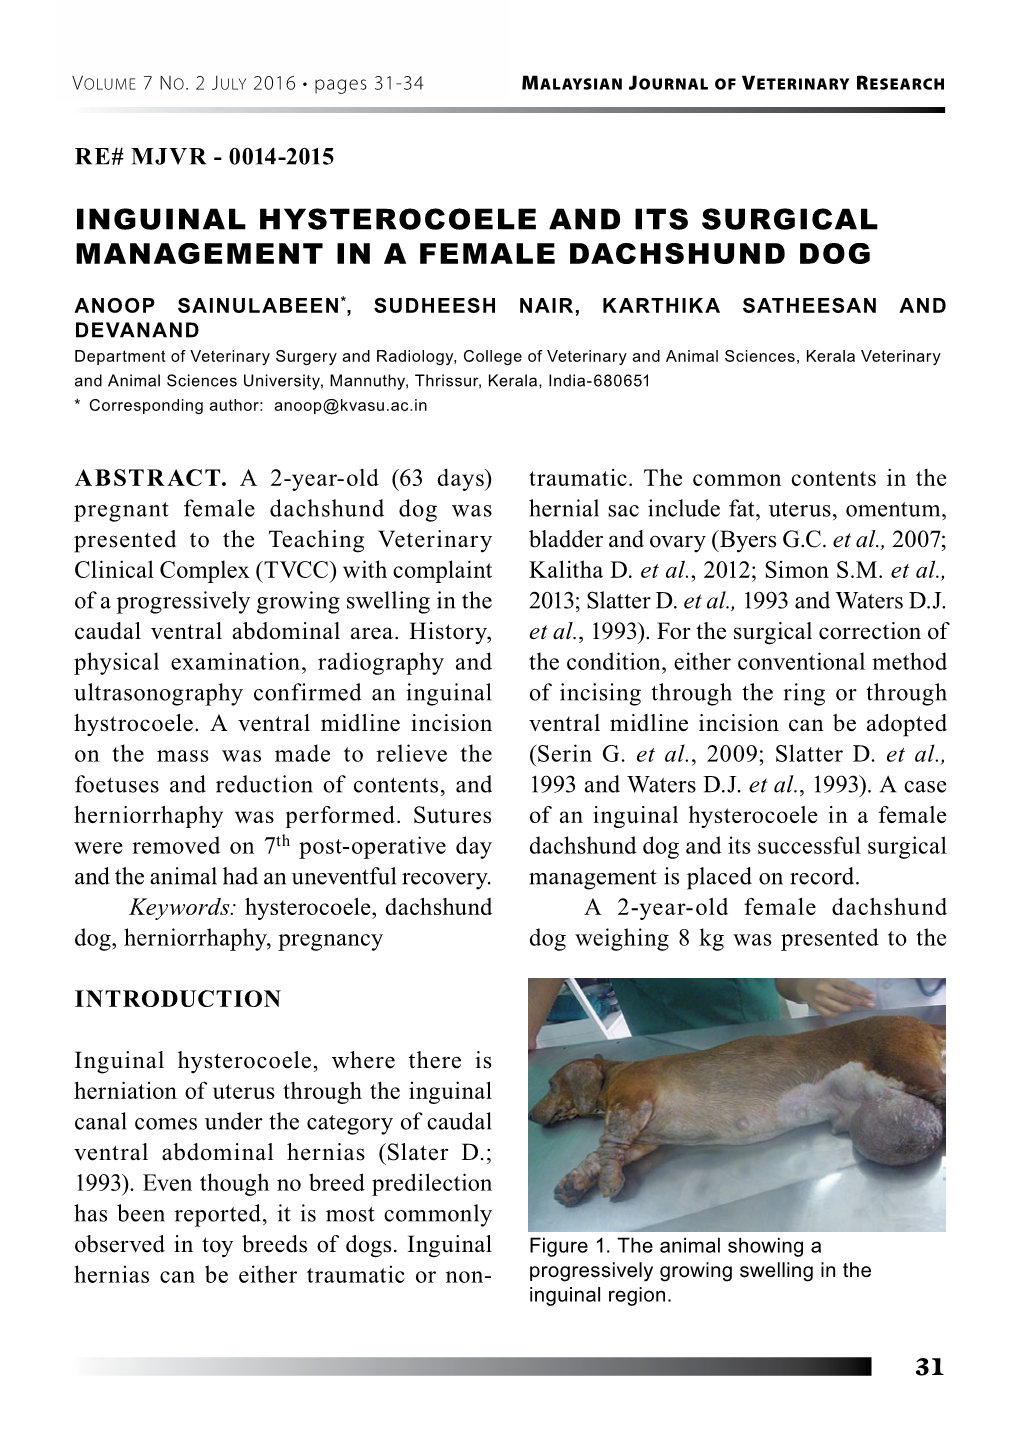 Inguinal Hysterocoele and Its Surgical Management in a Female Dachshund Dog